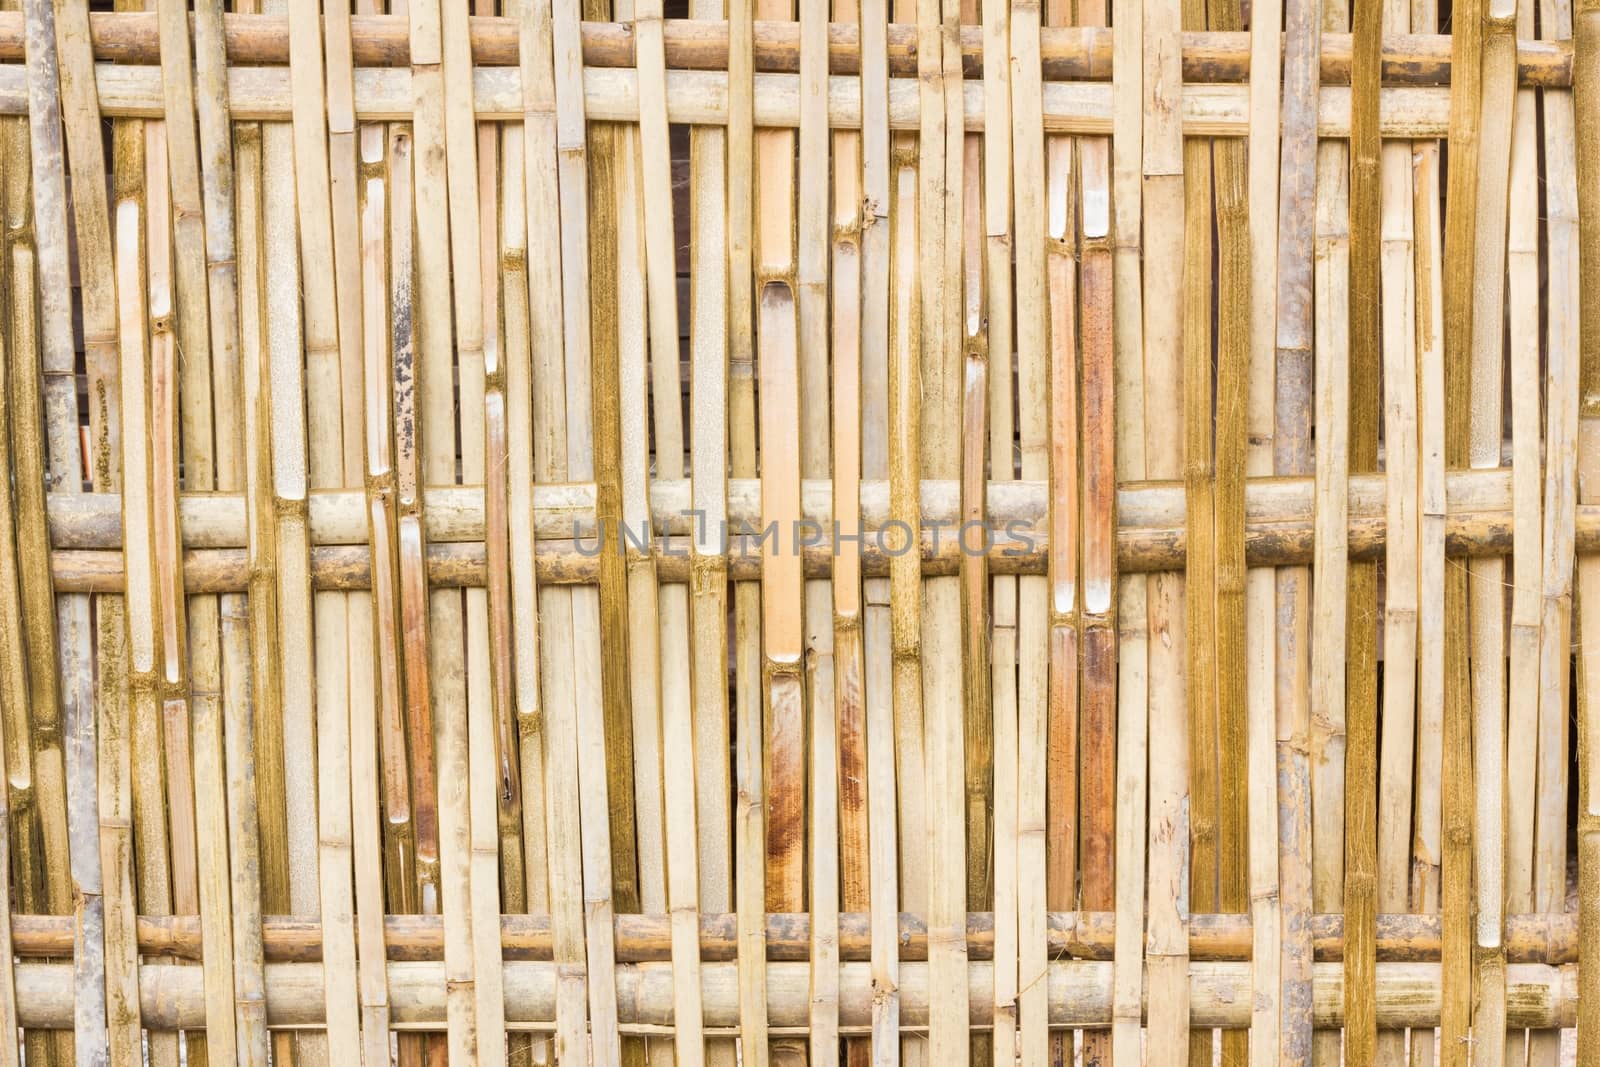 Bamboo fences by a3701027